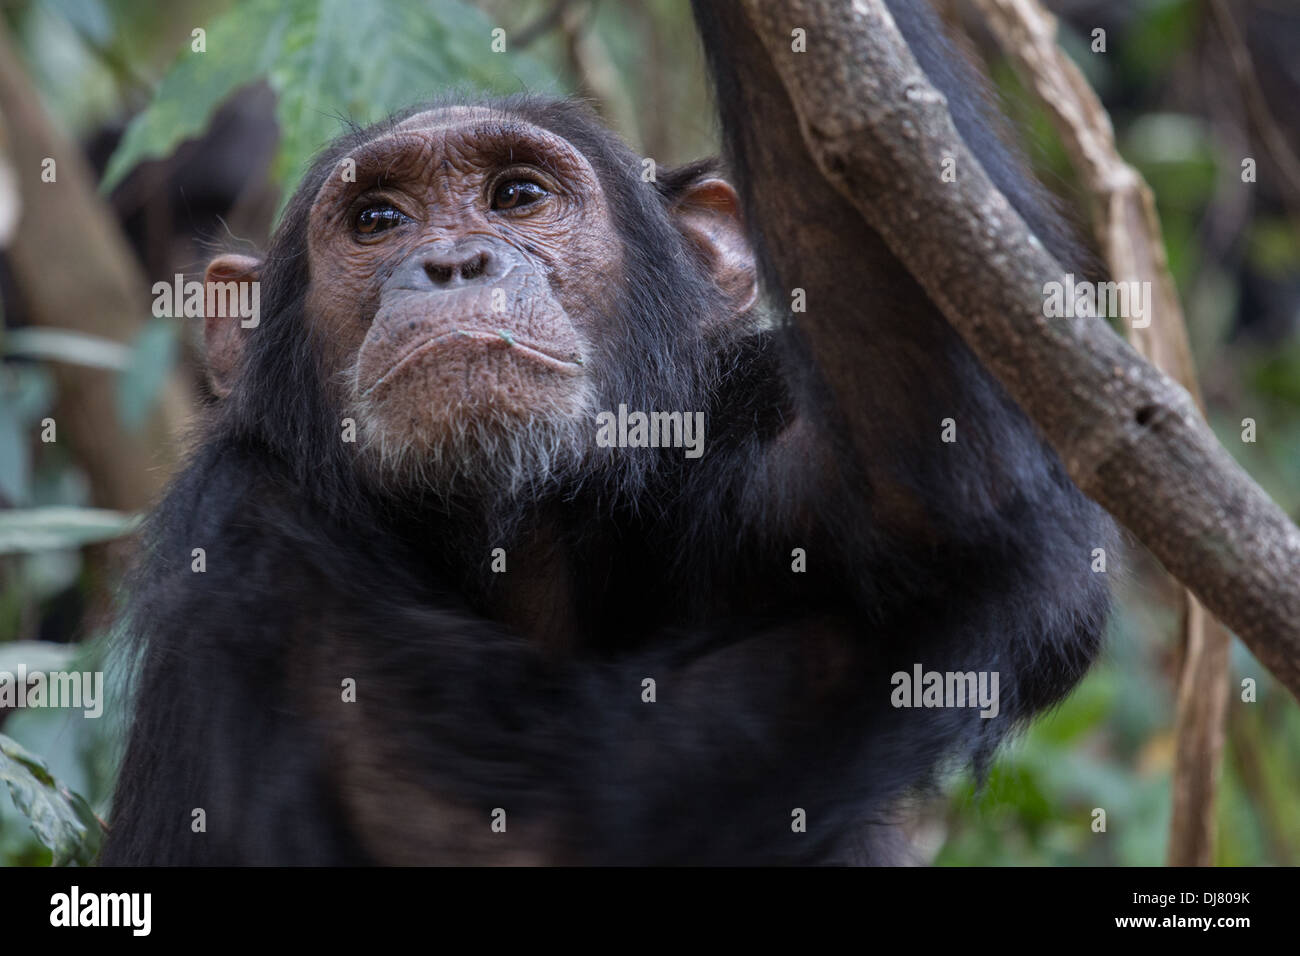 Eastern chimpanzee, Pan troglodytes schweinfurthii, young male resting in forest Stock Photo